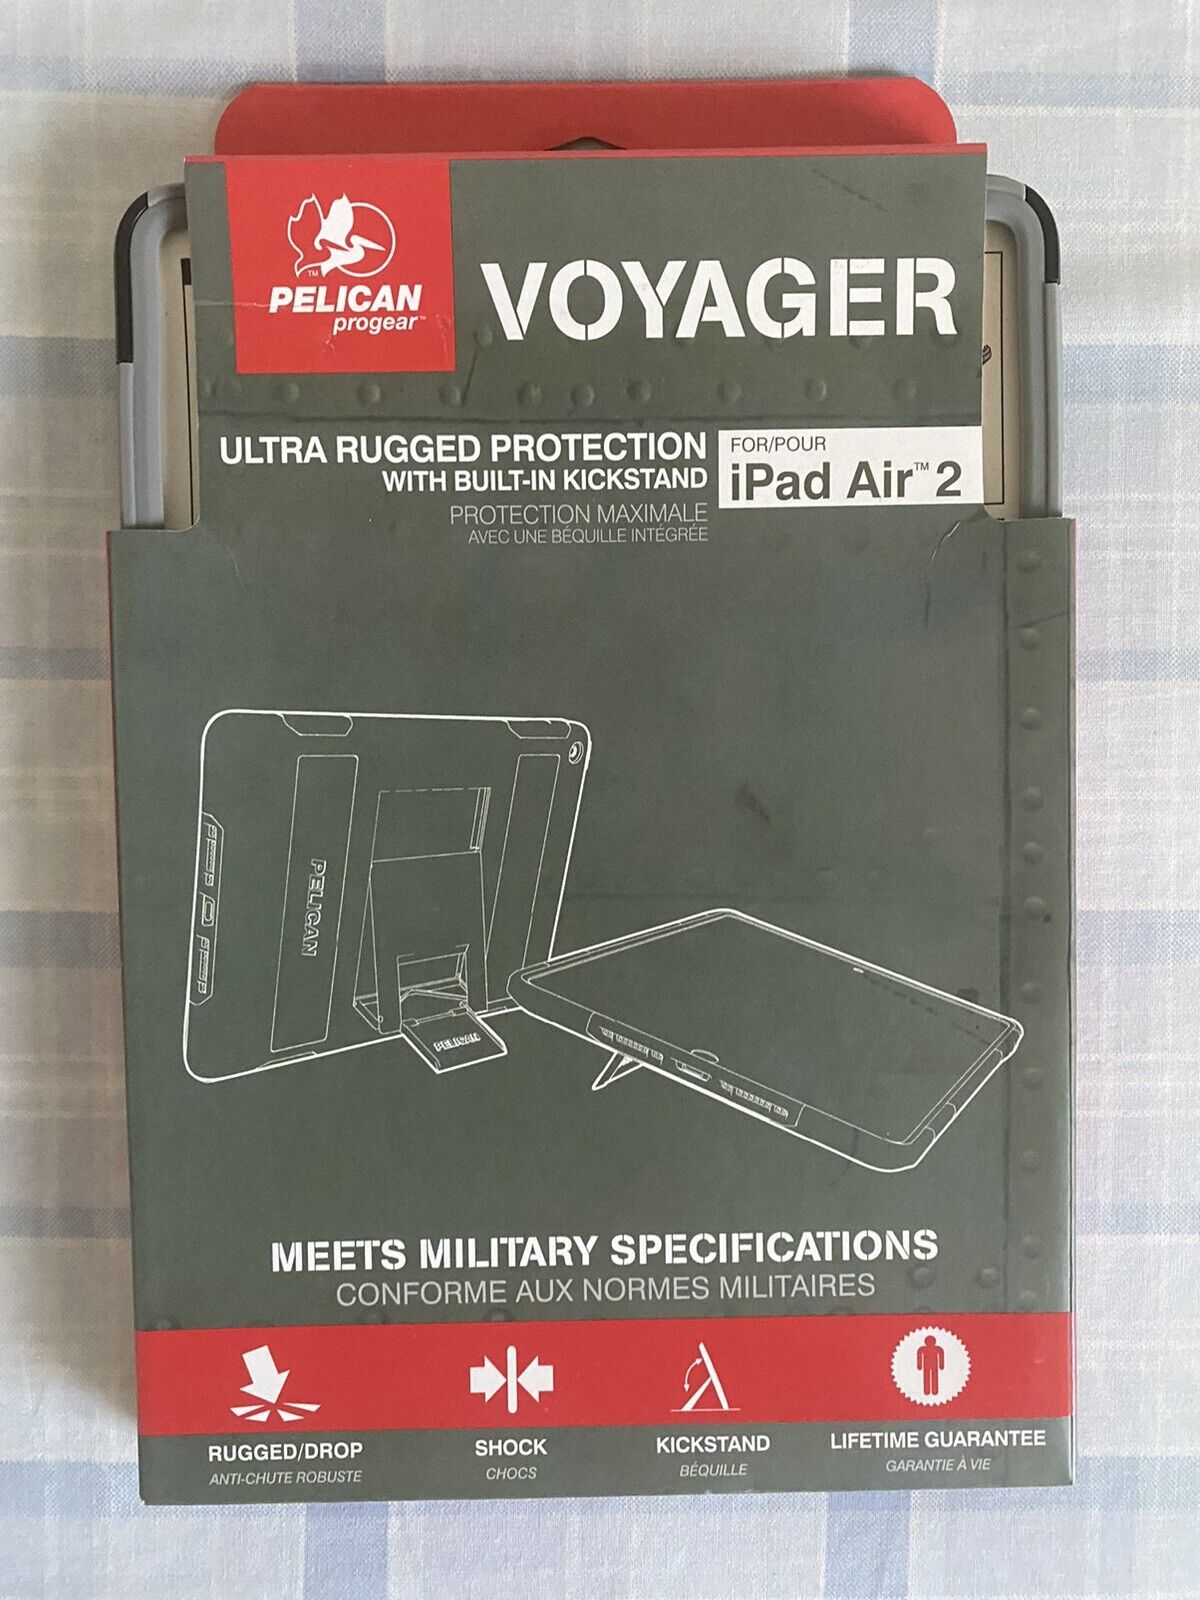 Pelican Voyager Ultra Rugged Protection Black Case with Kickstand iPad Air 2